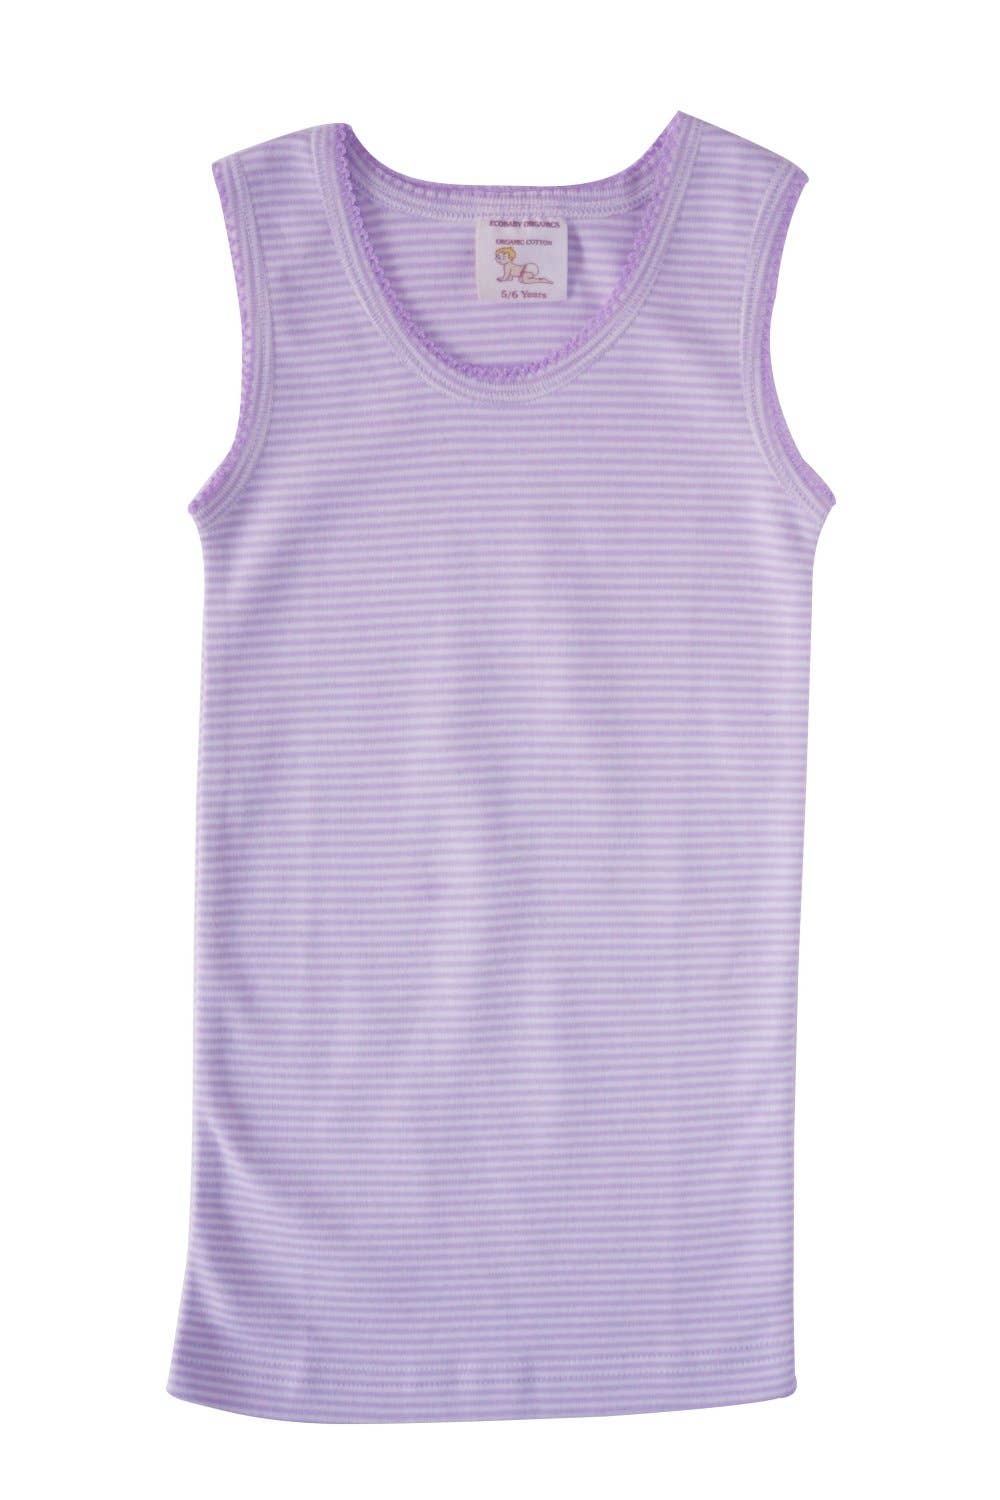 Healthy Body Head To Toe - Organic Cotton Tank Top/Undershirt – All Things  Being Eco